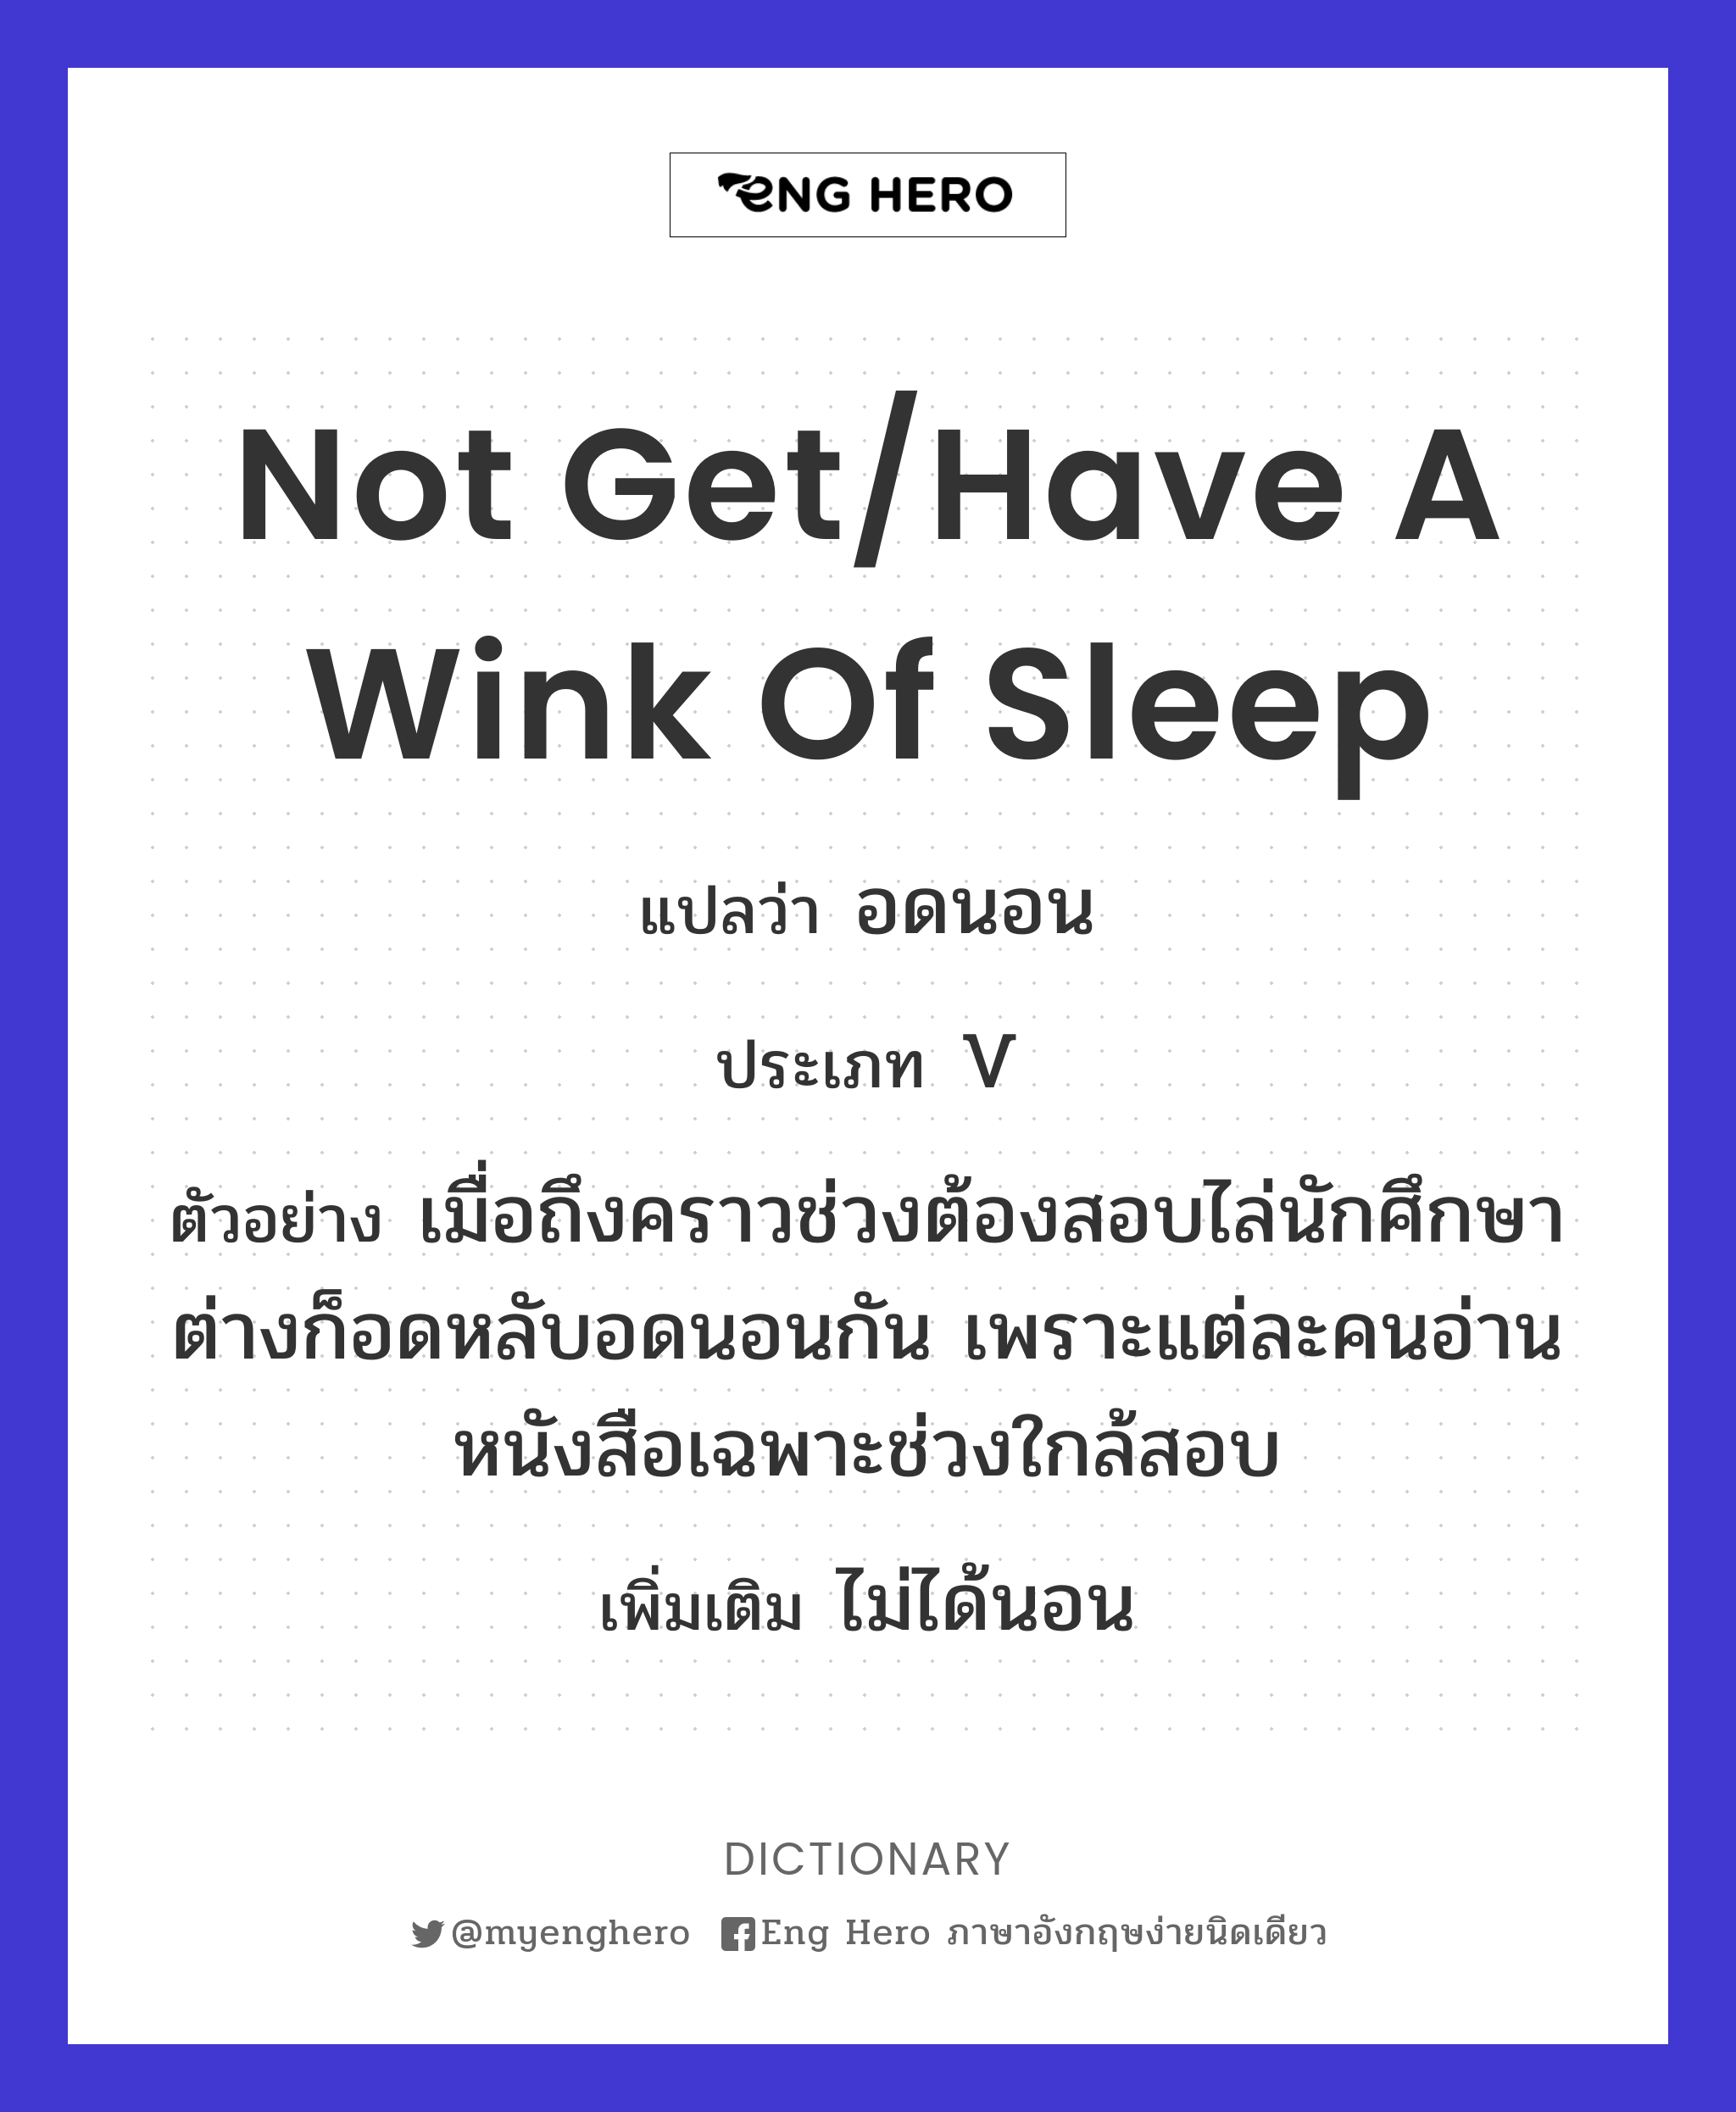 not get/have a wink of sleep